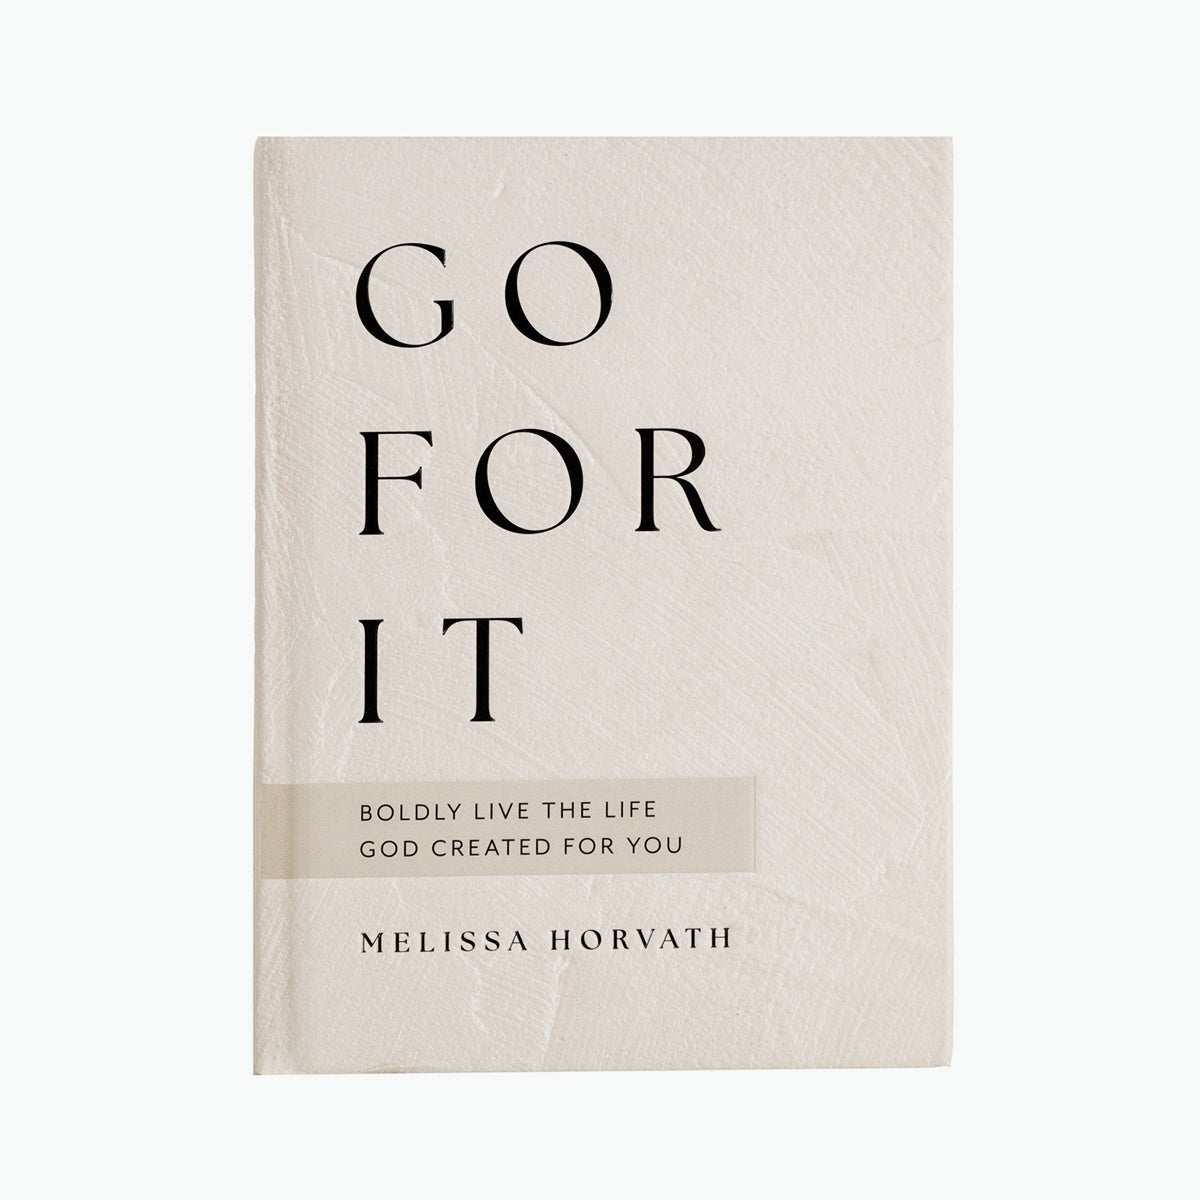 Go For It: 90 Devotions To Boldly Live the Life God Created